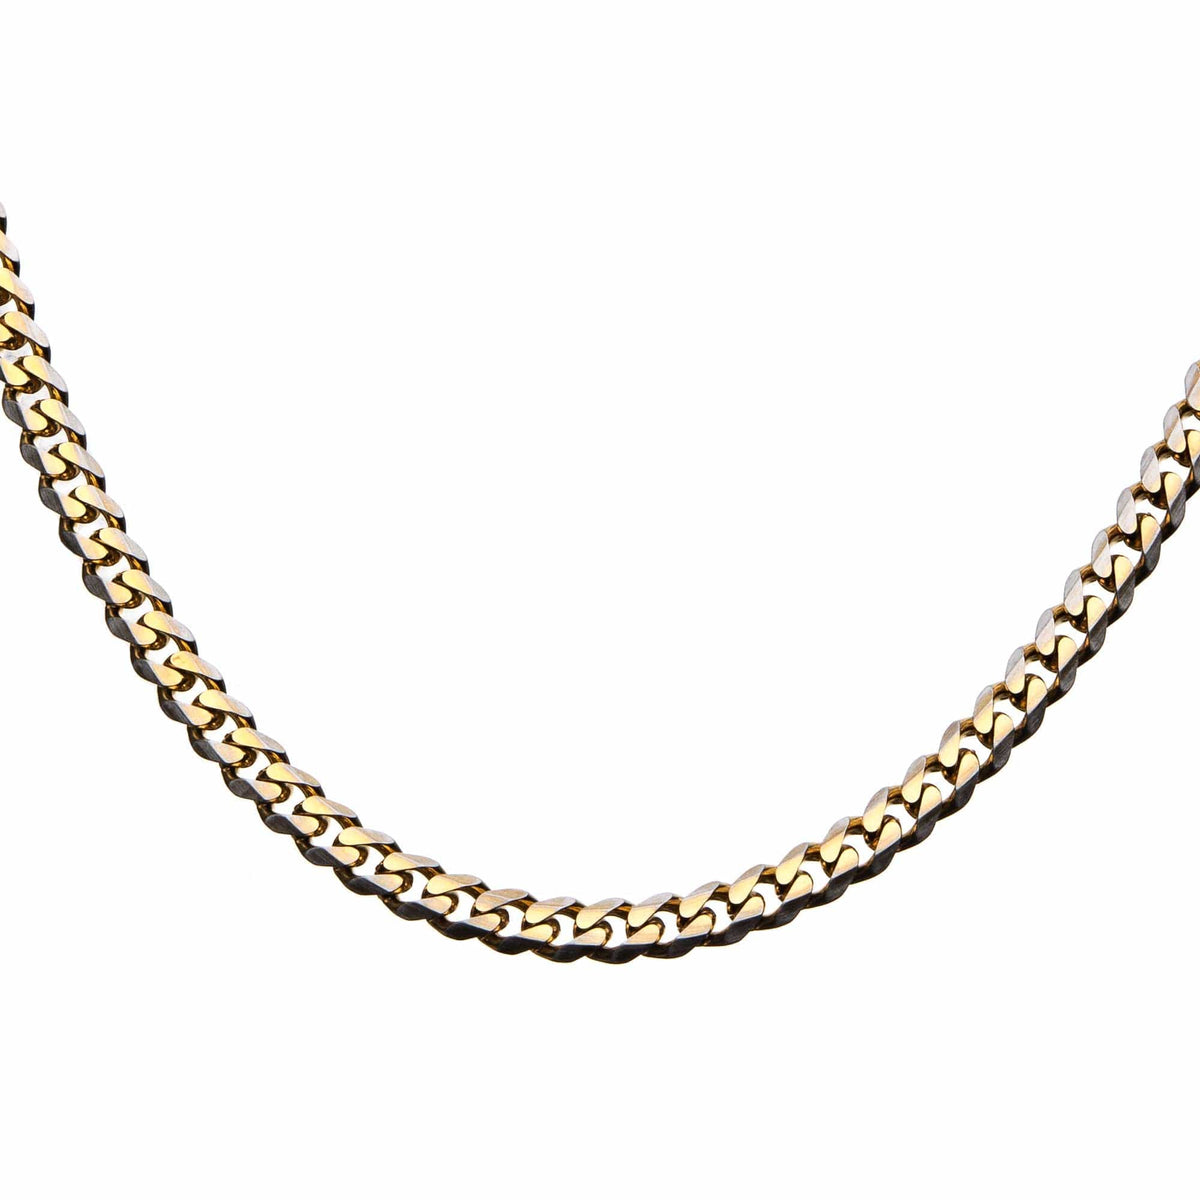 INOX JEWELRY Chains Golden Tone and Silver Tone Stainless Steel 8mm Diamond Cut Curb Chain NSTC27838G-30